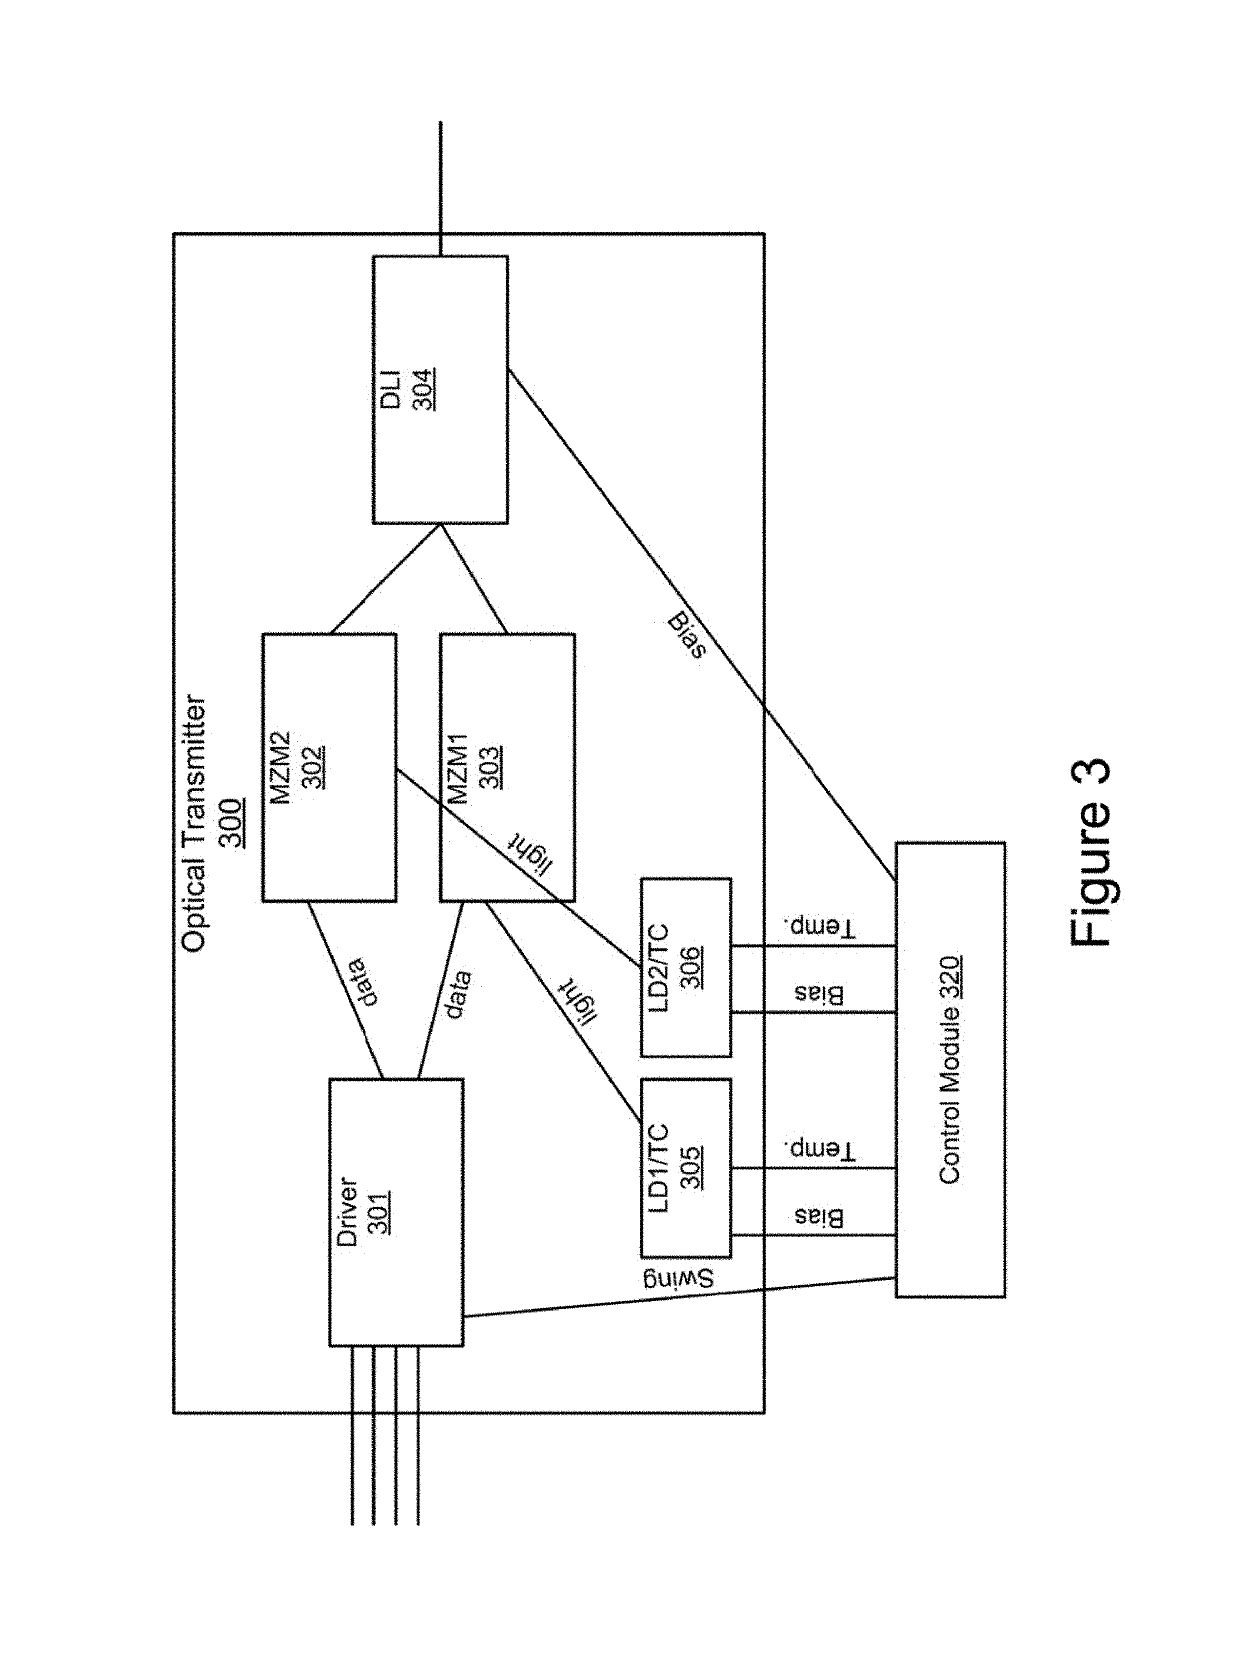 Rx delay line inteferometer tracking in closed-loop module control for communication